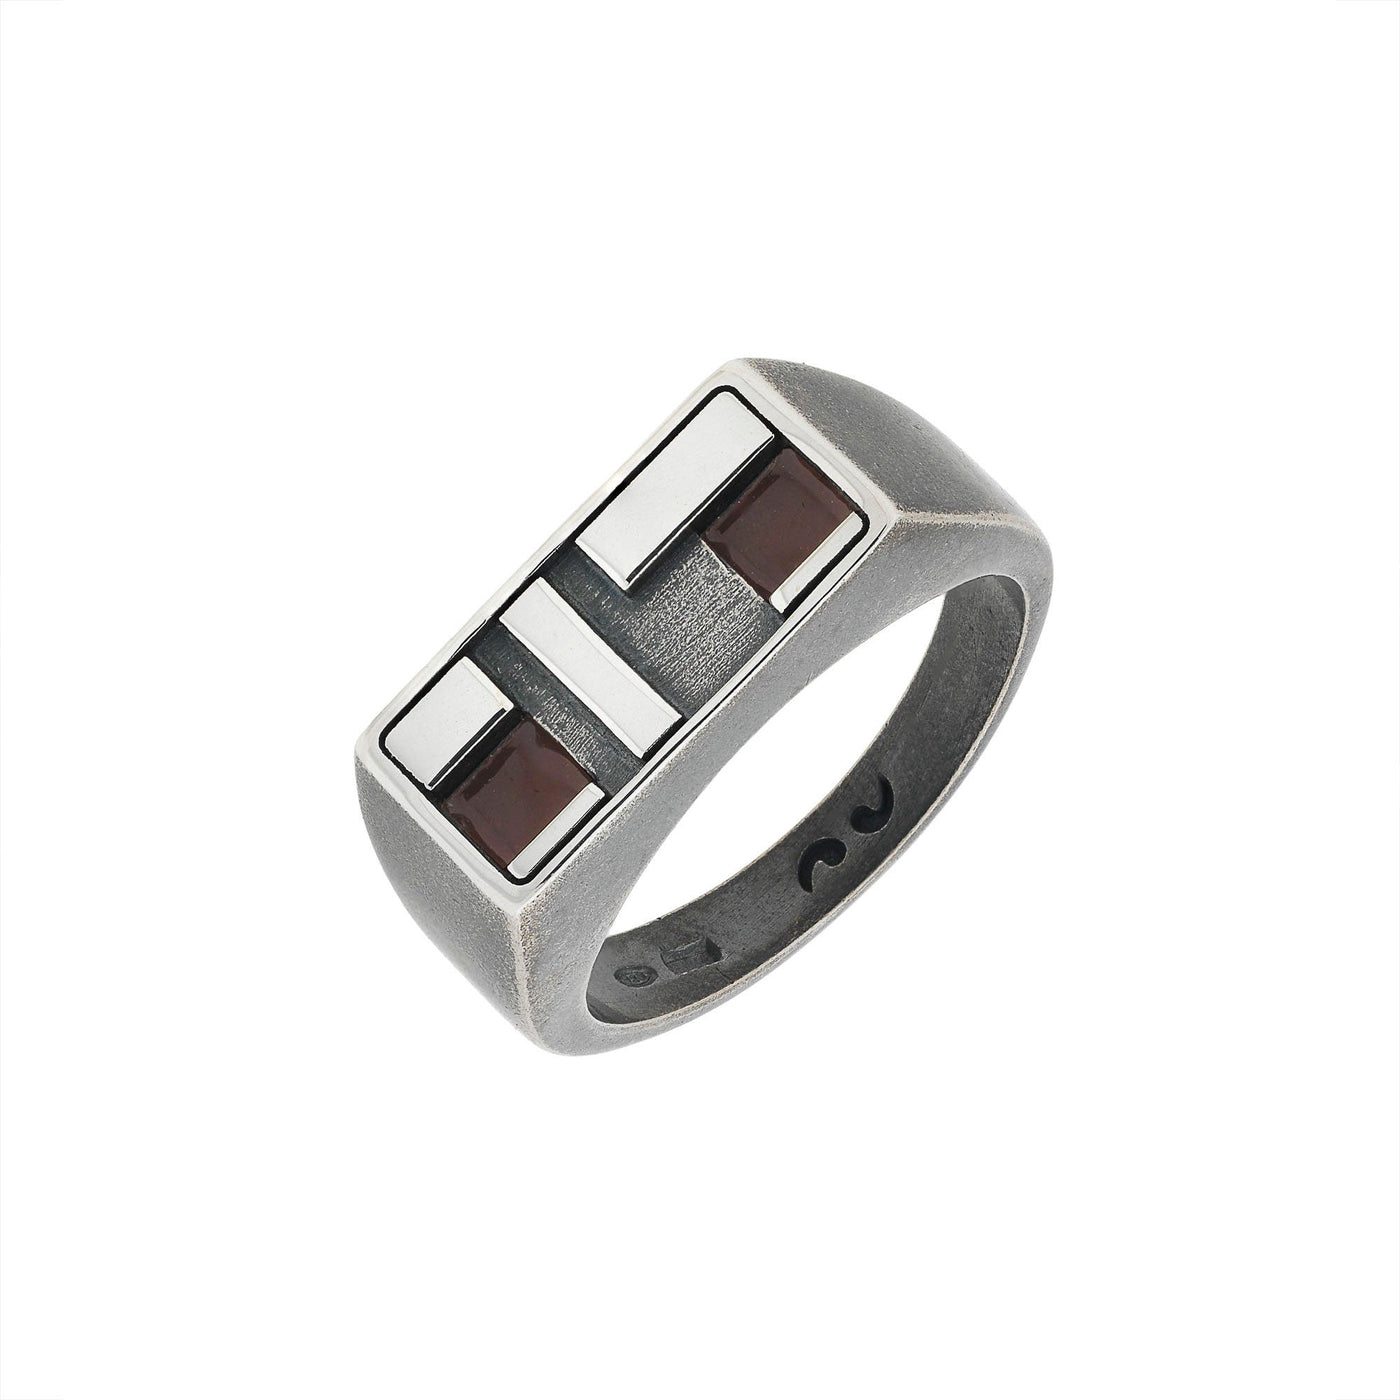 De Stijl Oxidized and Polished Silver Ring with Brown Enamel